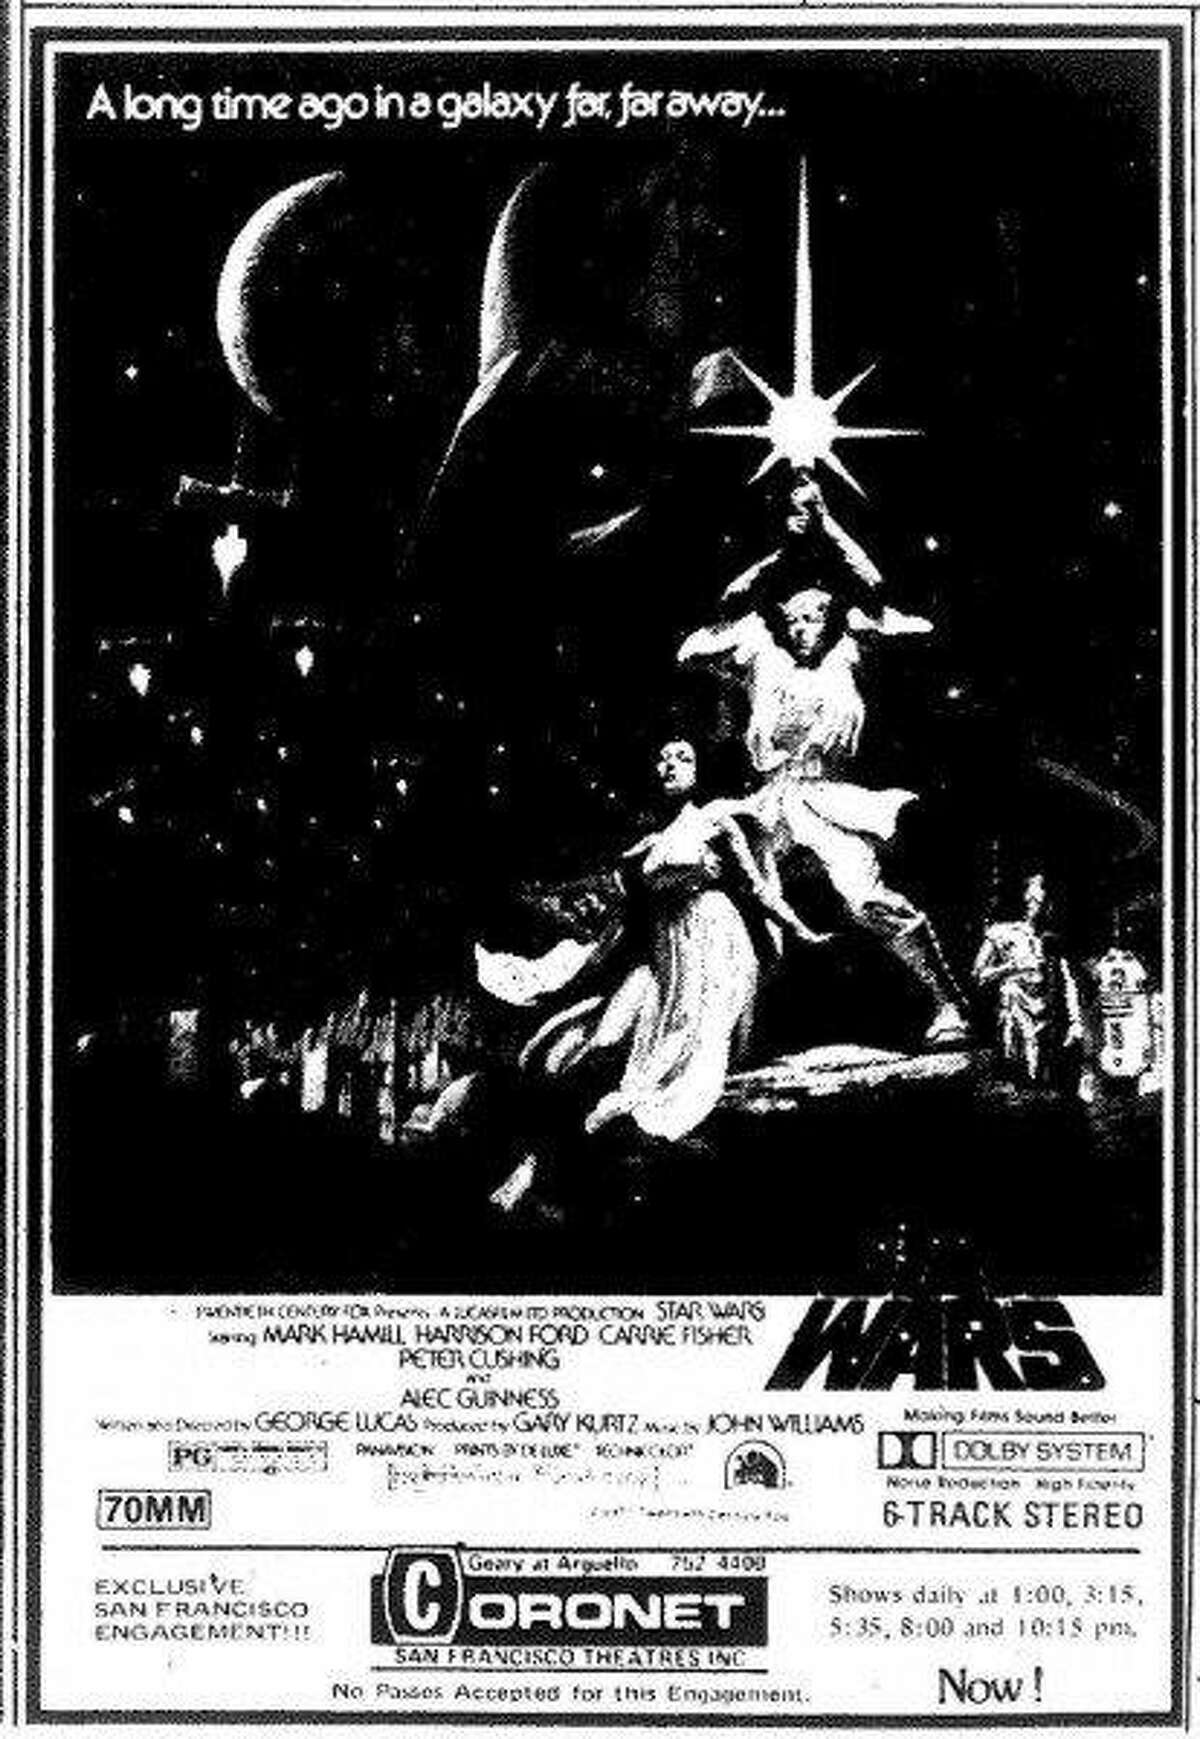 A Chronicle ad featuring the movie poster for "Star Wars" when it opened at the Coronet Theatre in San Francisco in 1977.